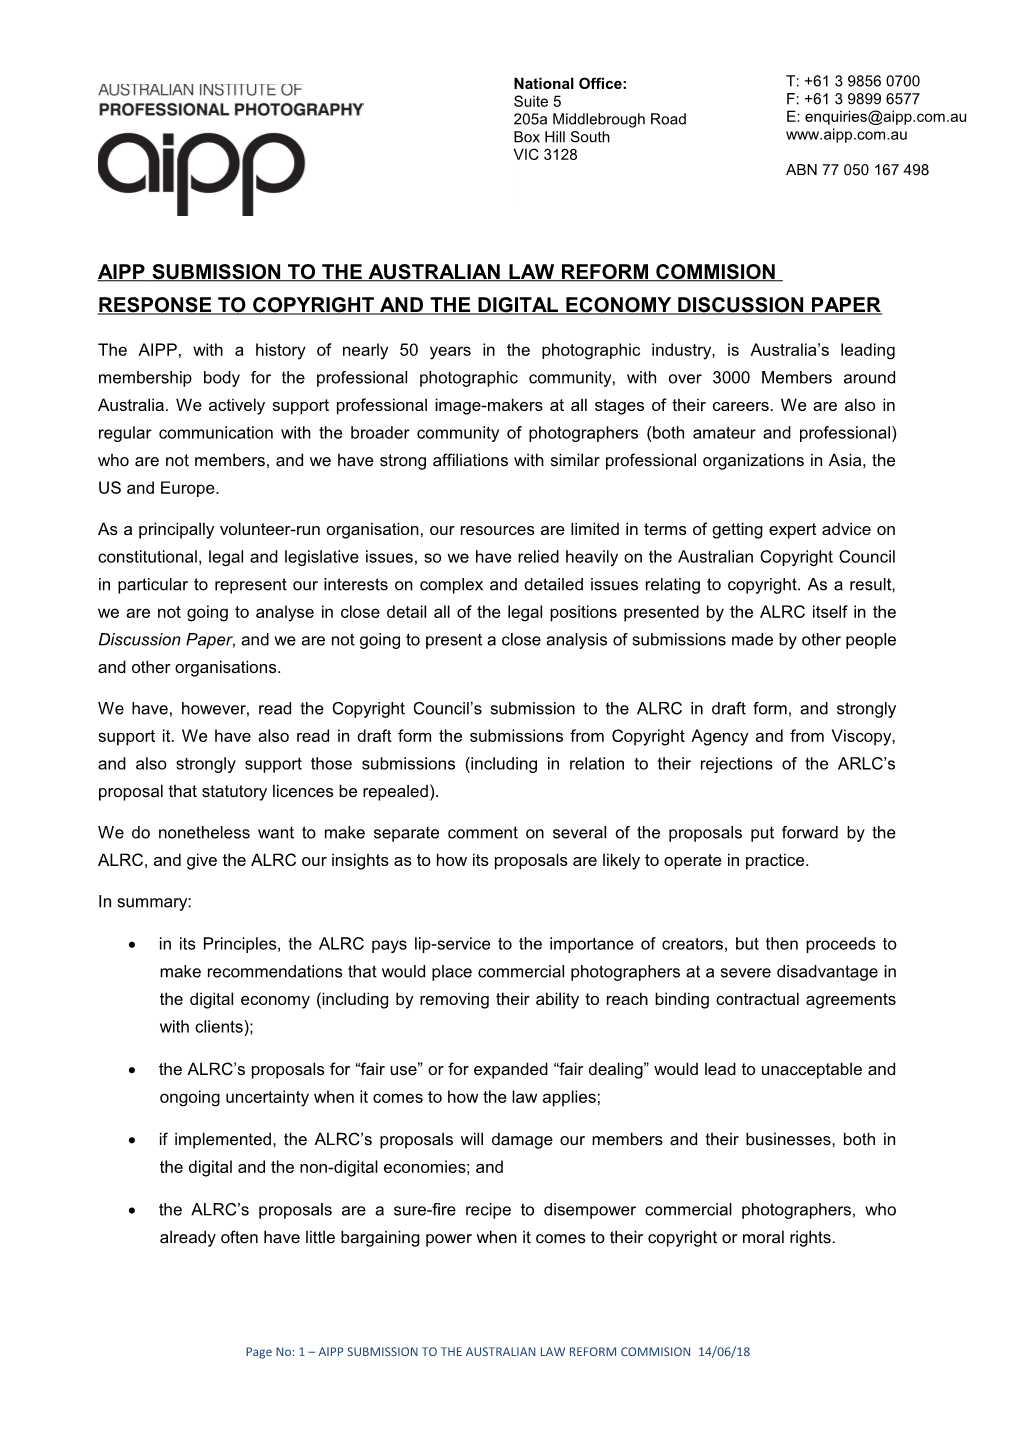 Aipp Submission to the Australian Law Reform Commision Response to Copyright and the Digital